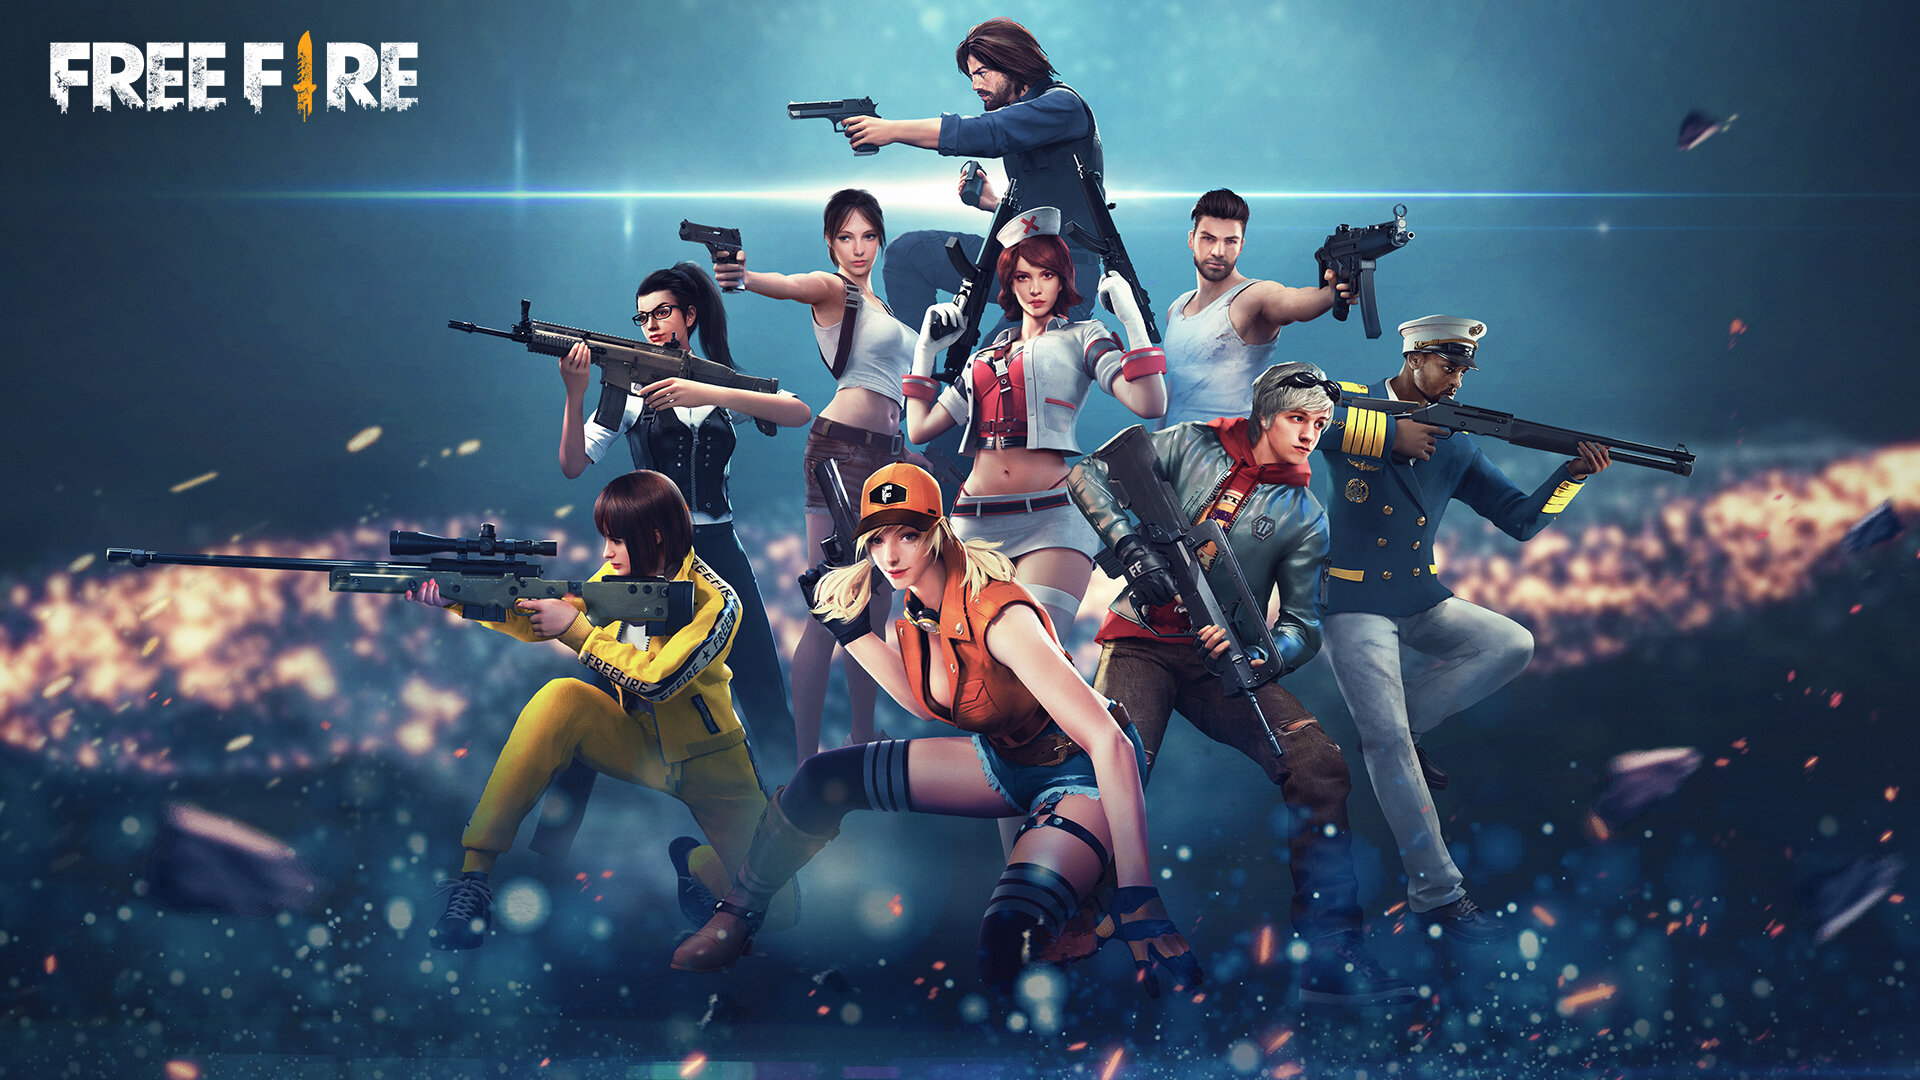 Get a comprehensive comparison of Free Fire with other popular mobile battle royale games. See how Free Fire stacks up against PUBG, COD Mobile, and Fortnite in terms of gameplay, graphics, and features. Find out which game is best for you.